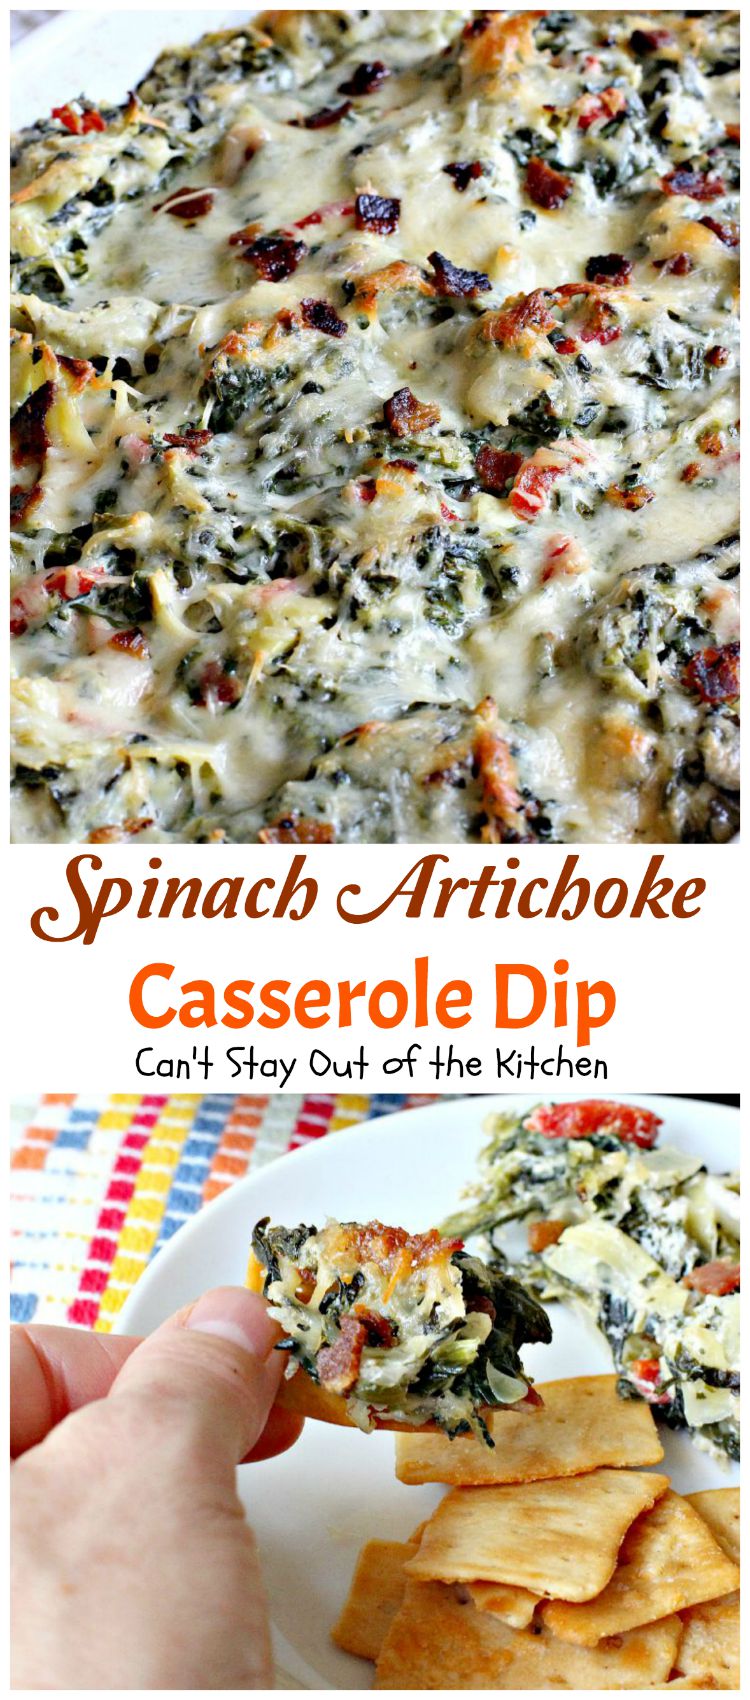 Spinach Artichoke Casserole Dip | Can't Stay Out of the Kitchen | fabulous #Neiman-Marcus #appetizer that's loaded with #cheese #bacon #spinach and #artichokes. Great #tailgating recipe. #glutenfree